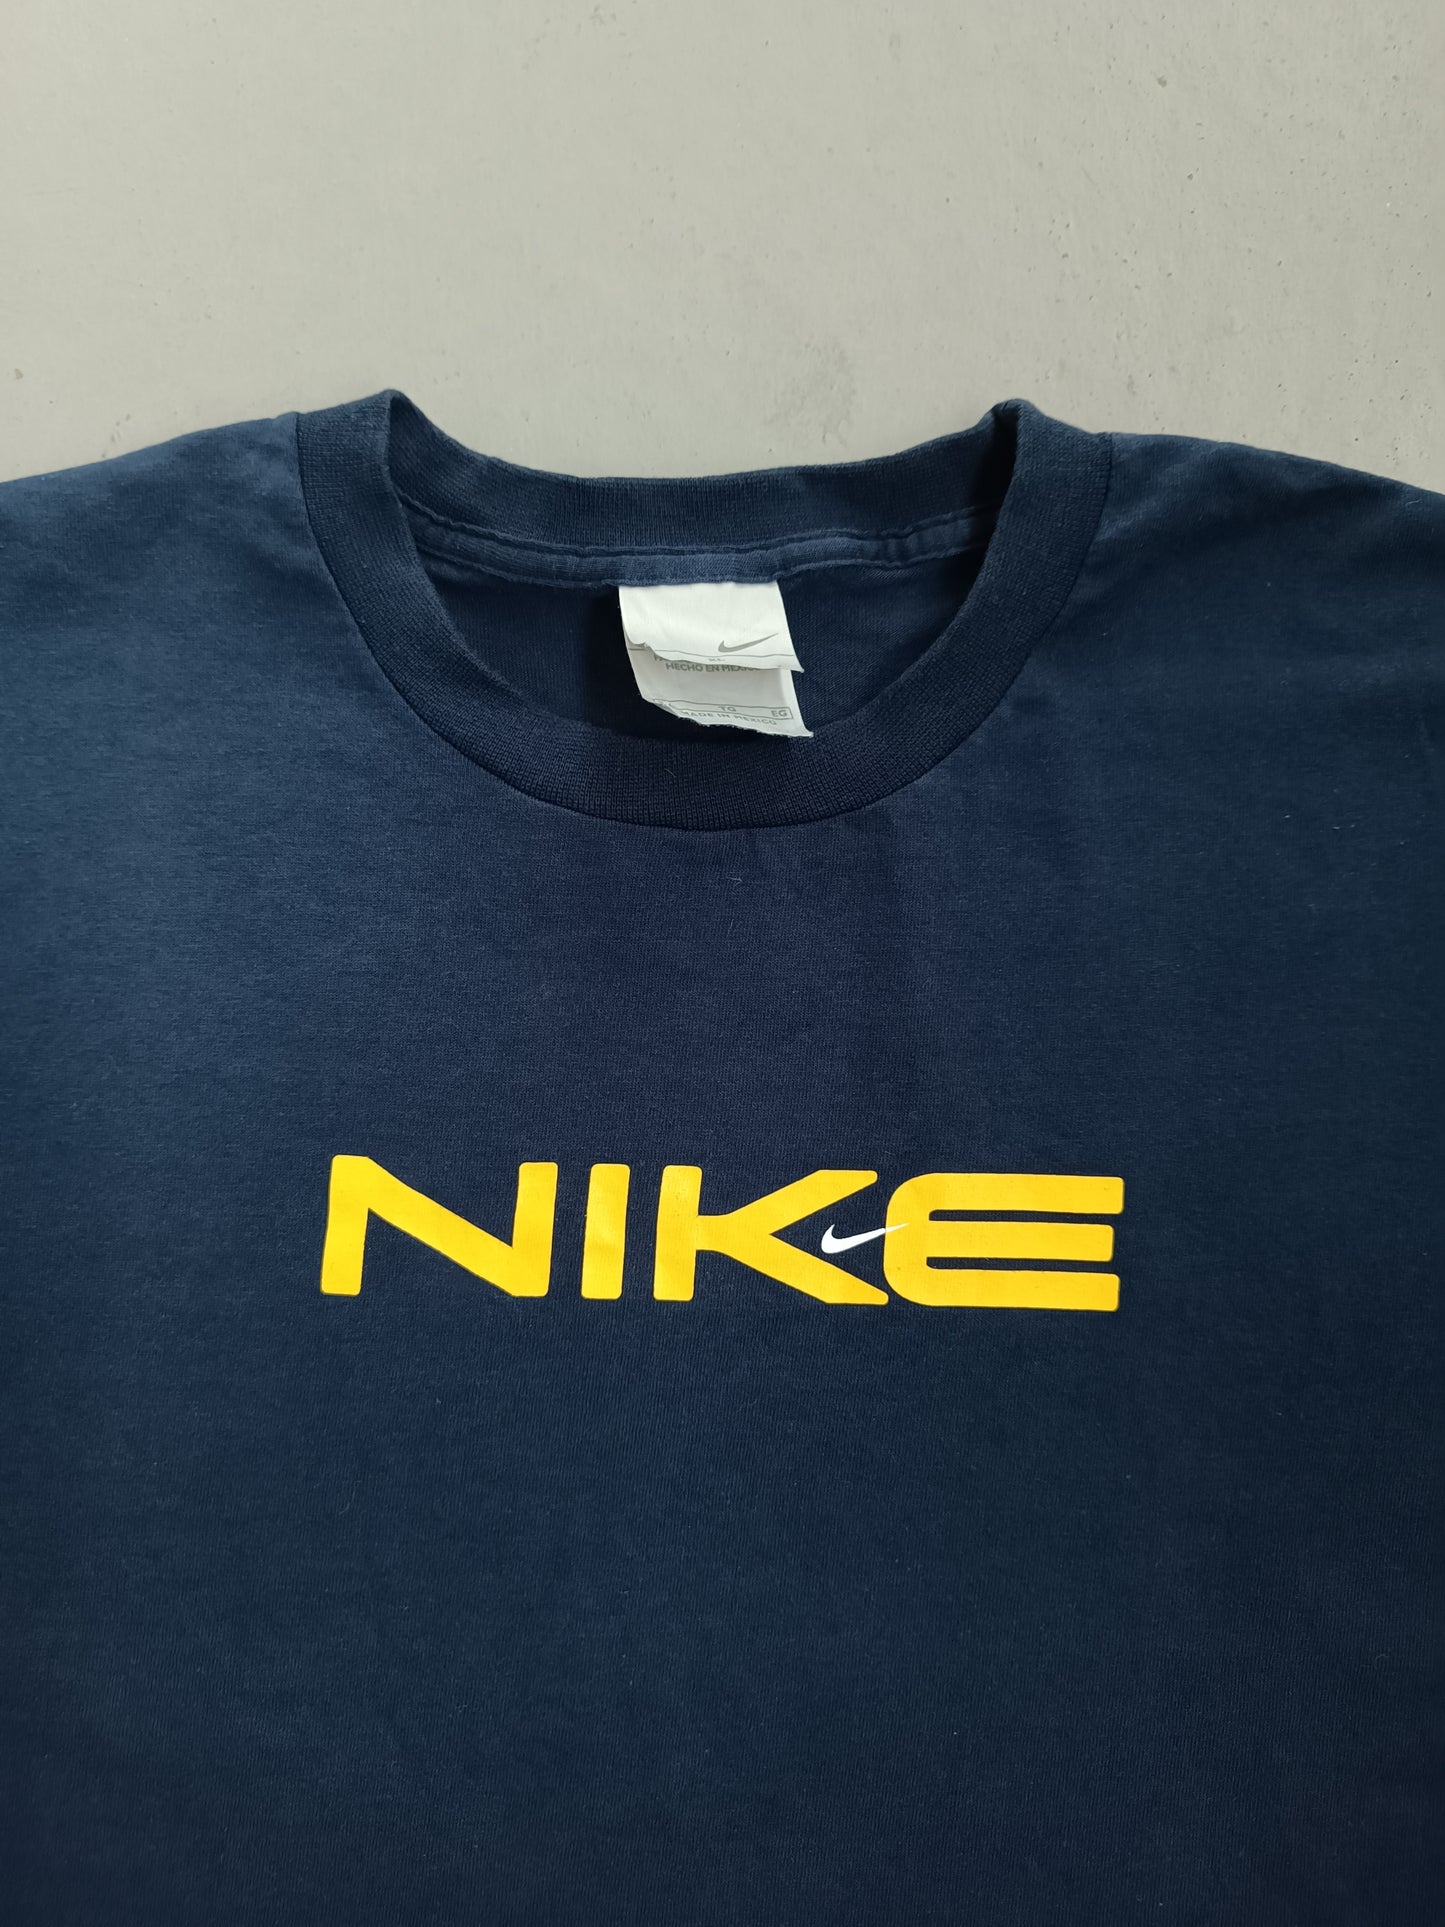 Nike Spellout - XL